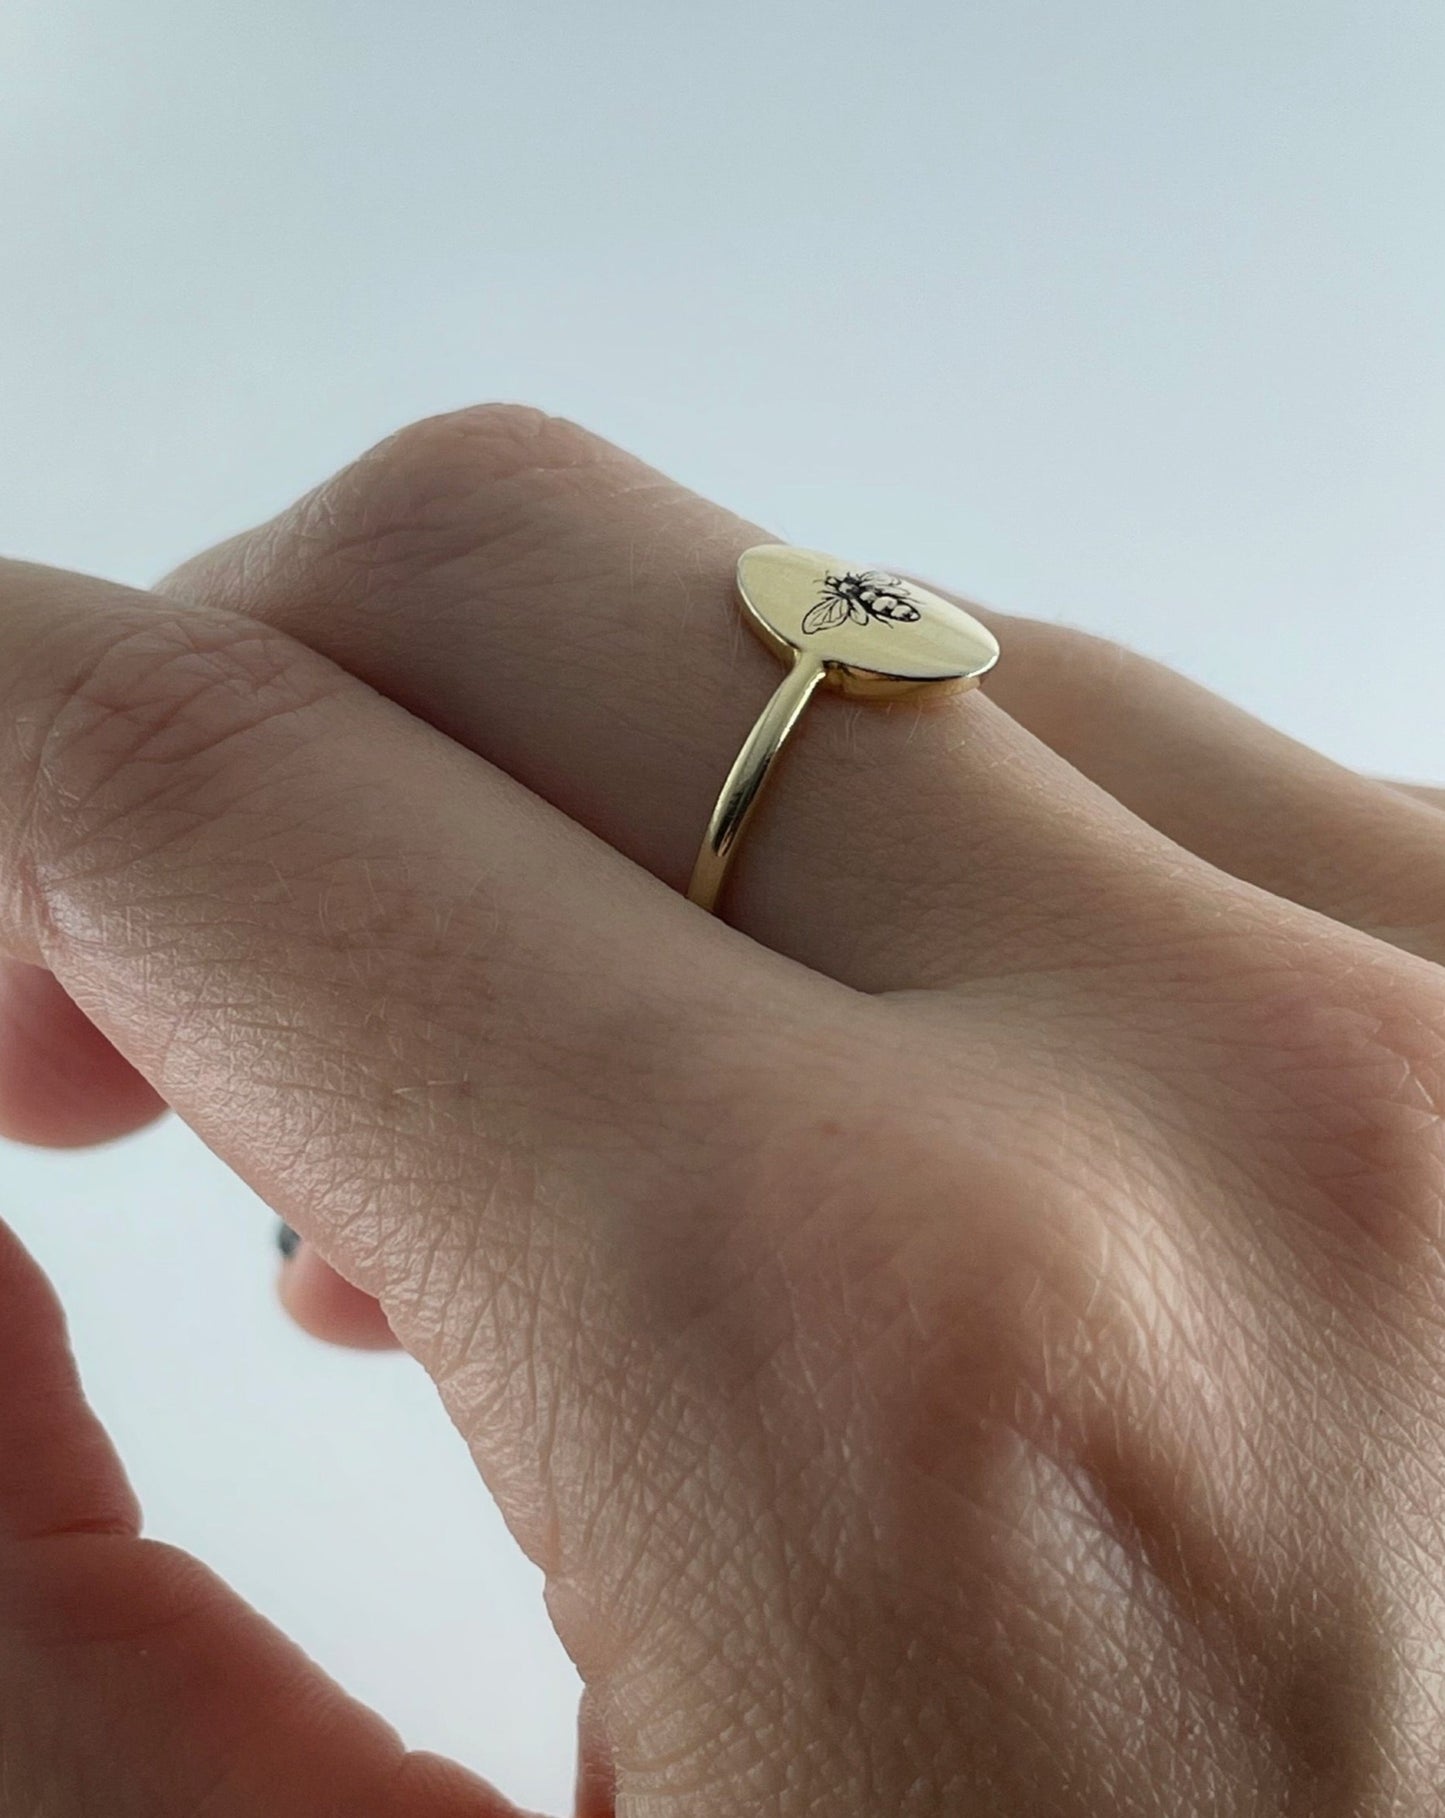 9ct oval ring with bee engraving, shown from the side of a human hand